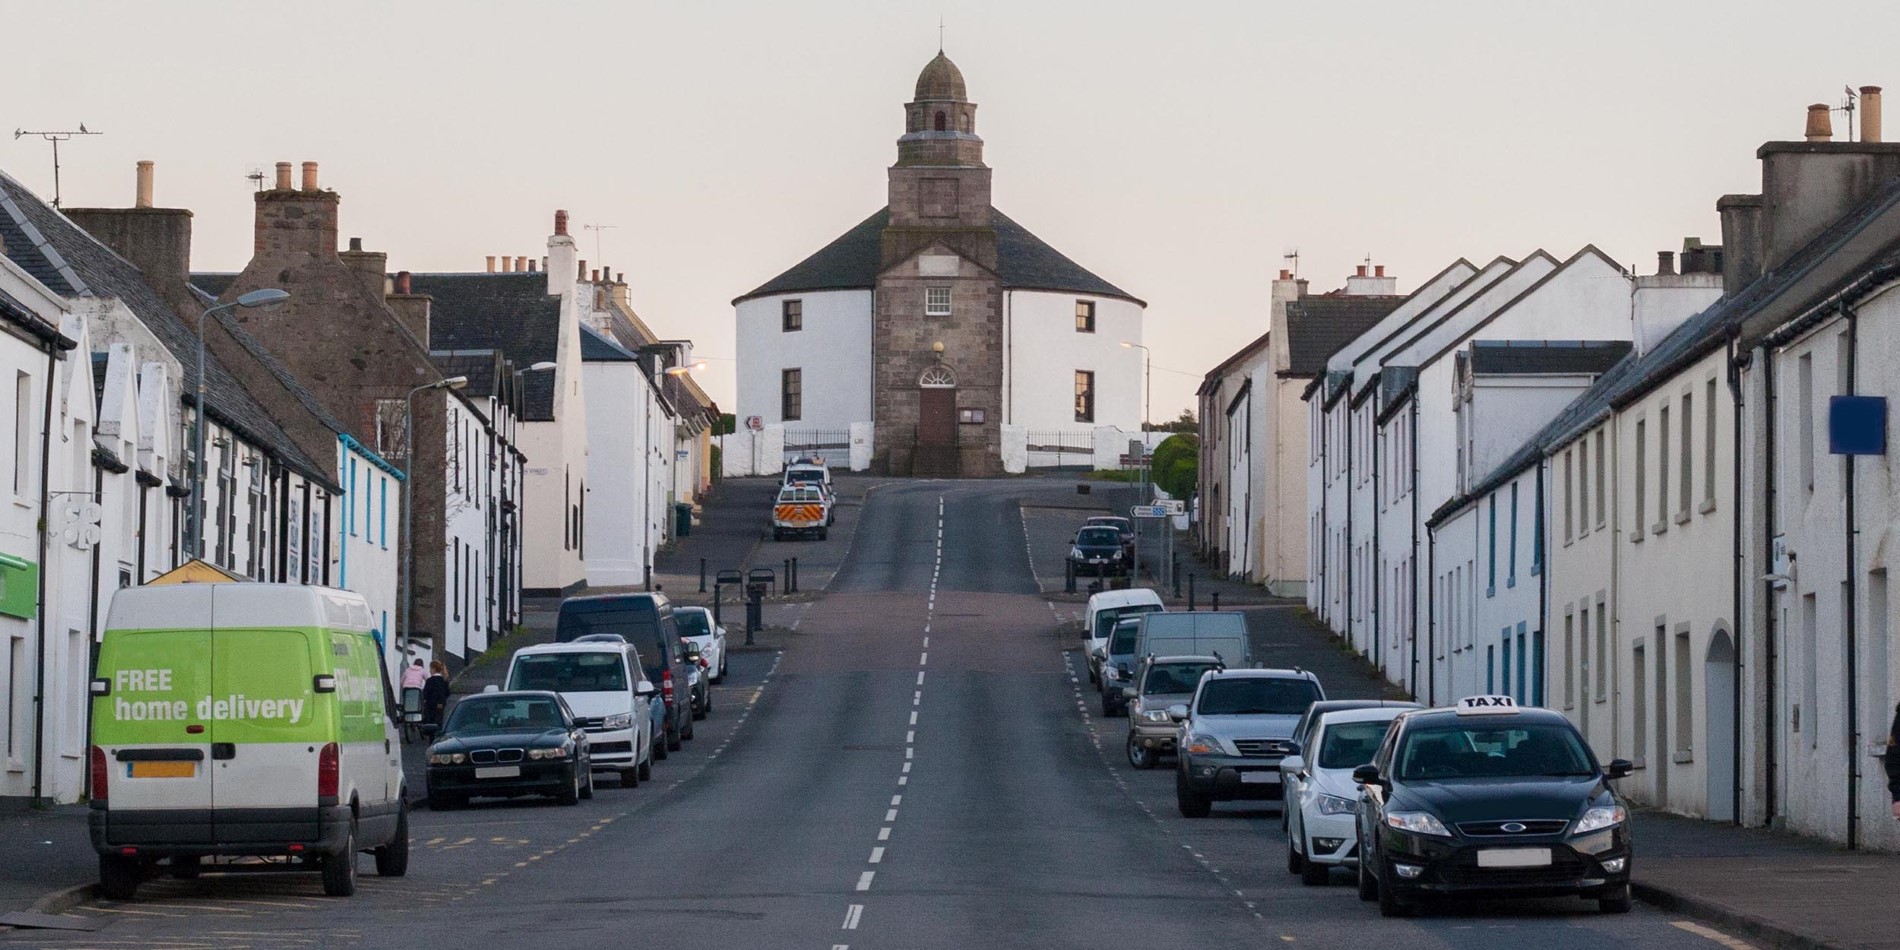 Discover the fascinating Round Church in Islay.